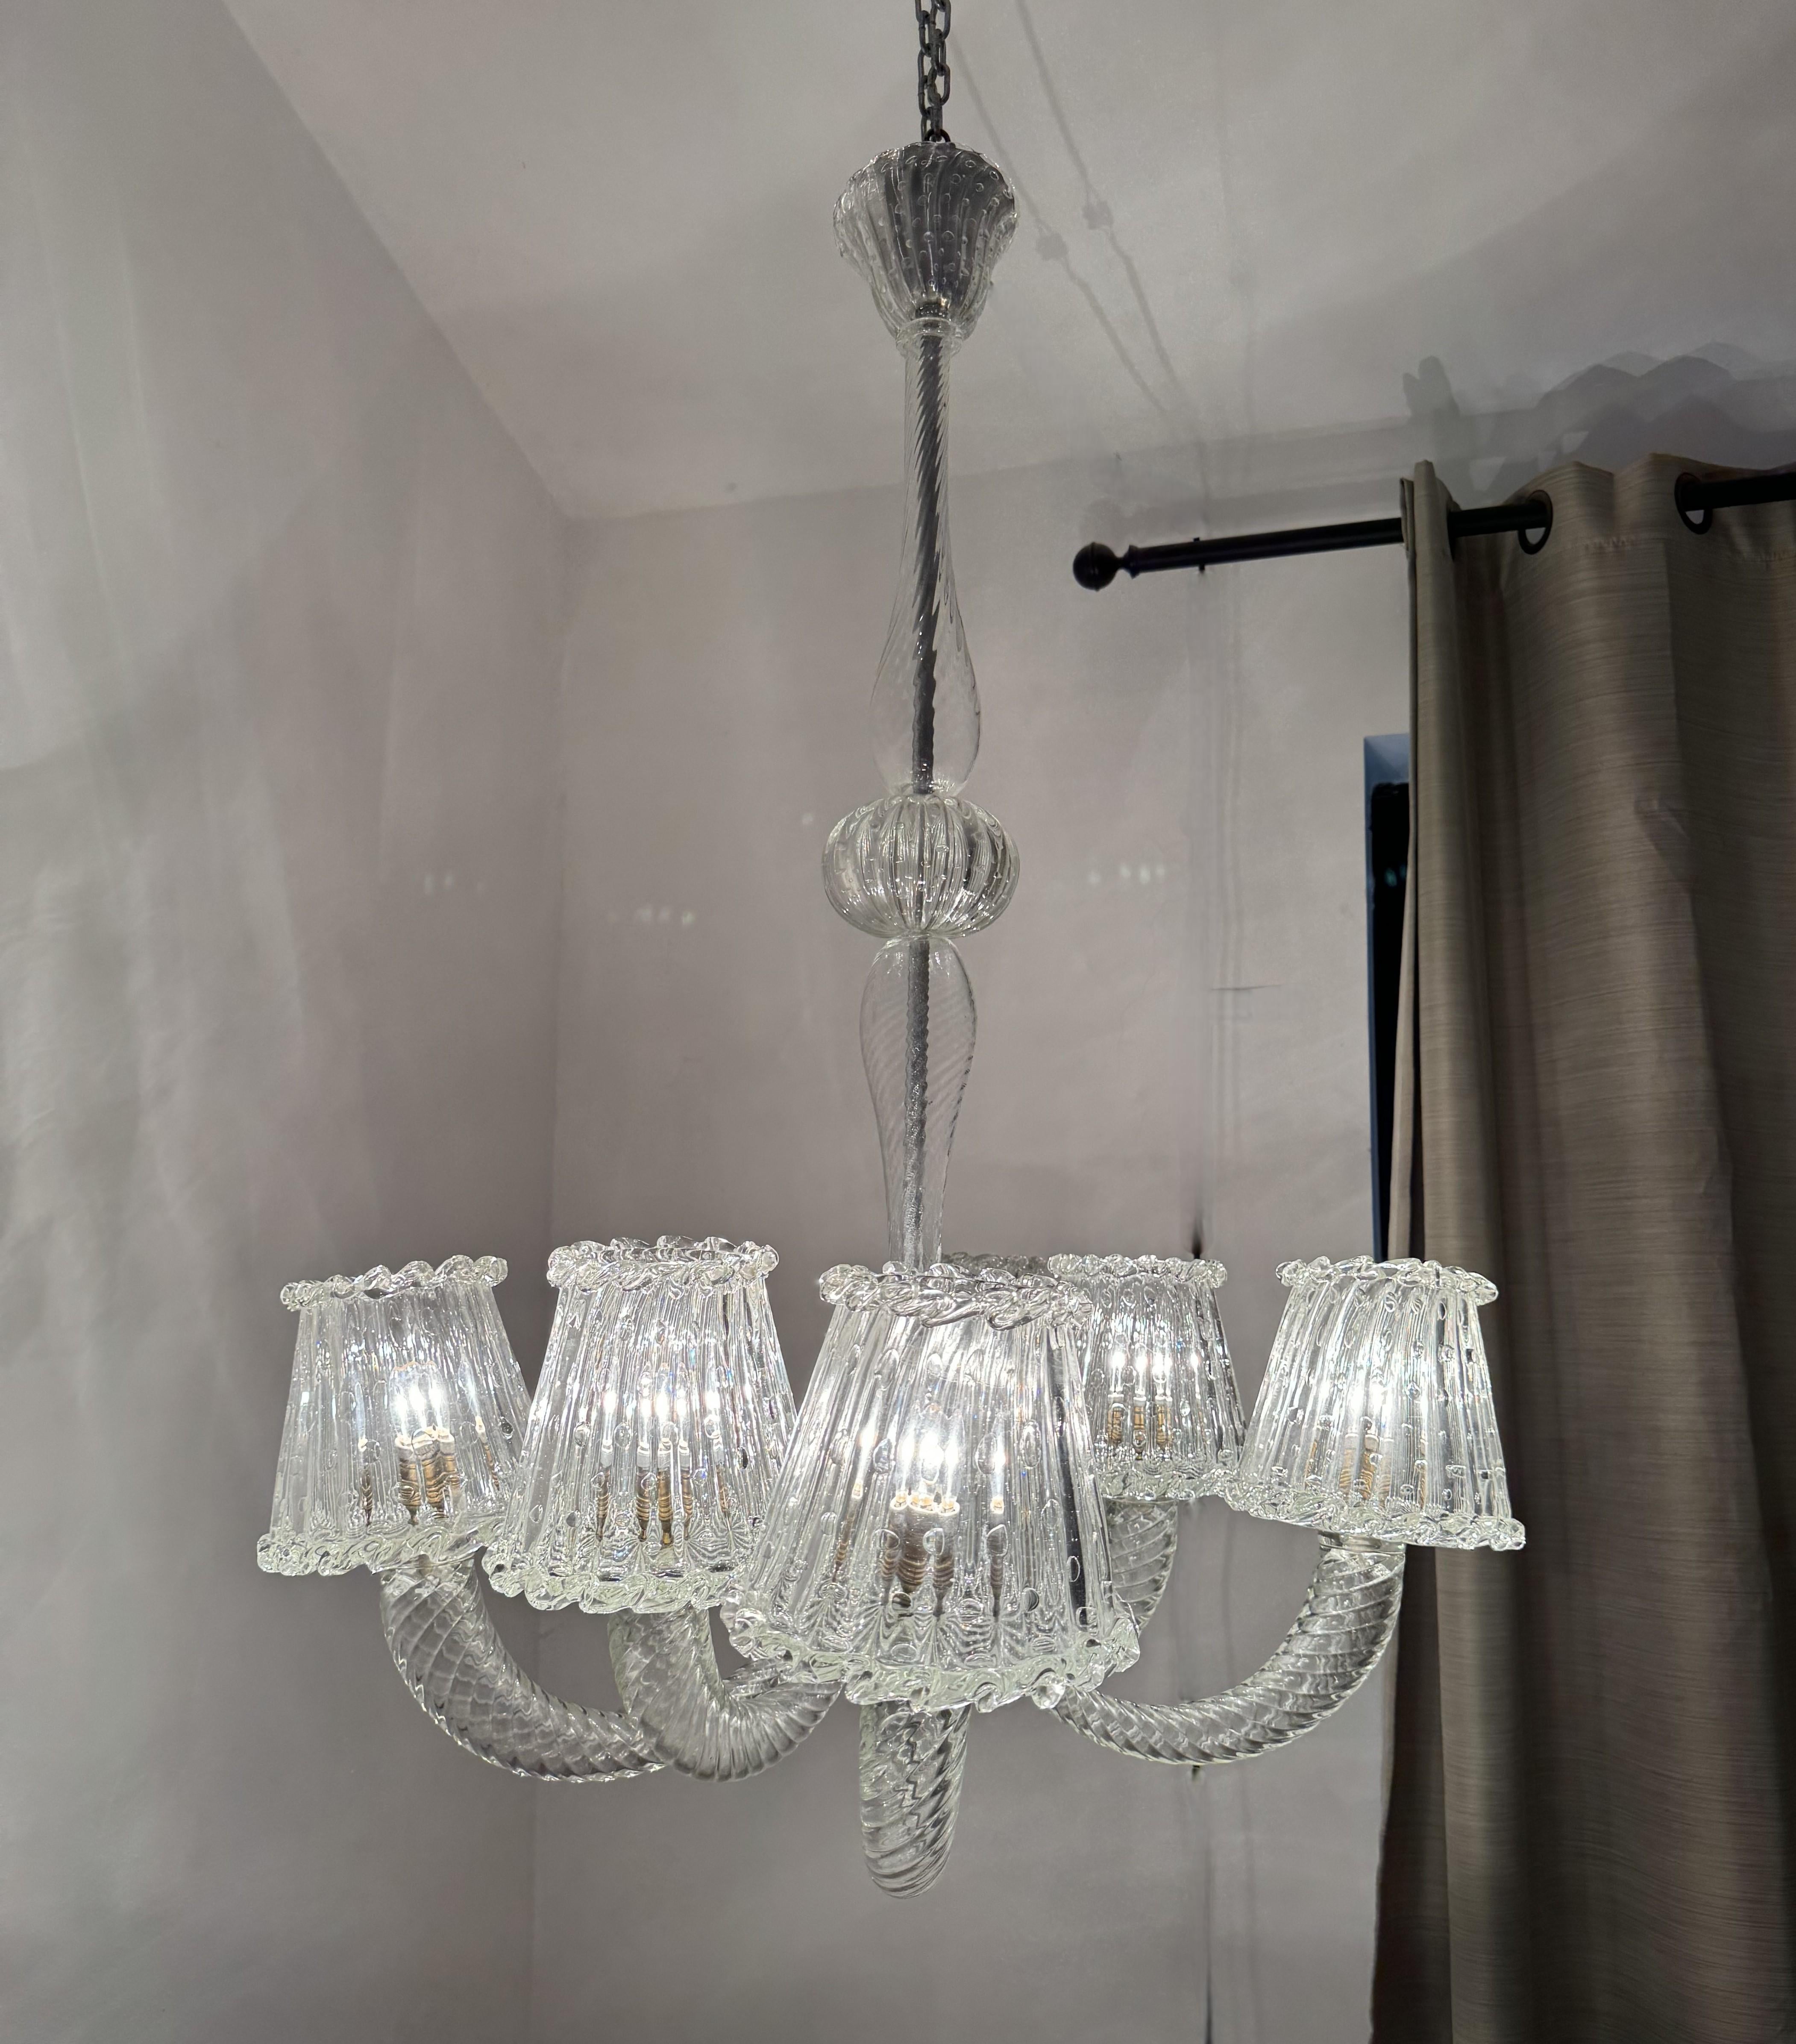 Art Deco Six Light Chandelier Attr. Barovier & Toso, Murano, Italy ca. 1930 For Sale 8